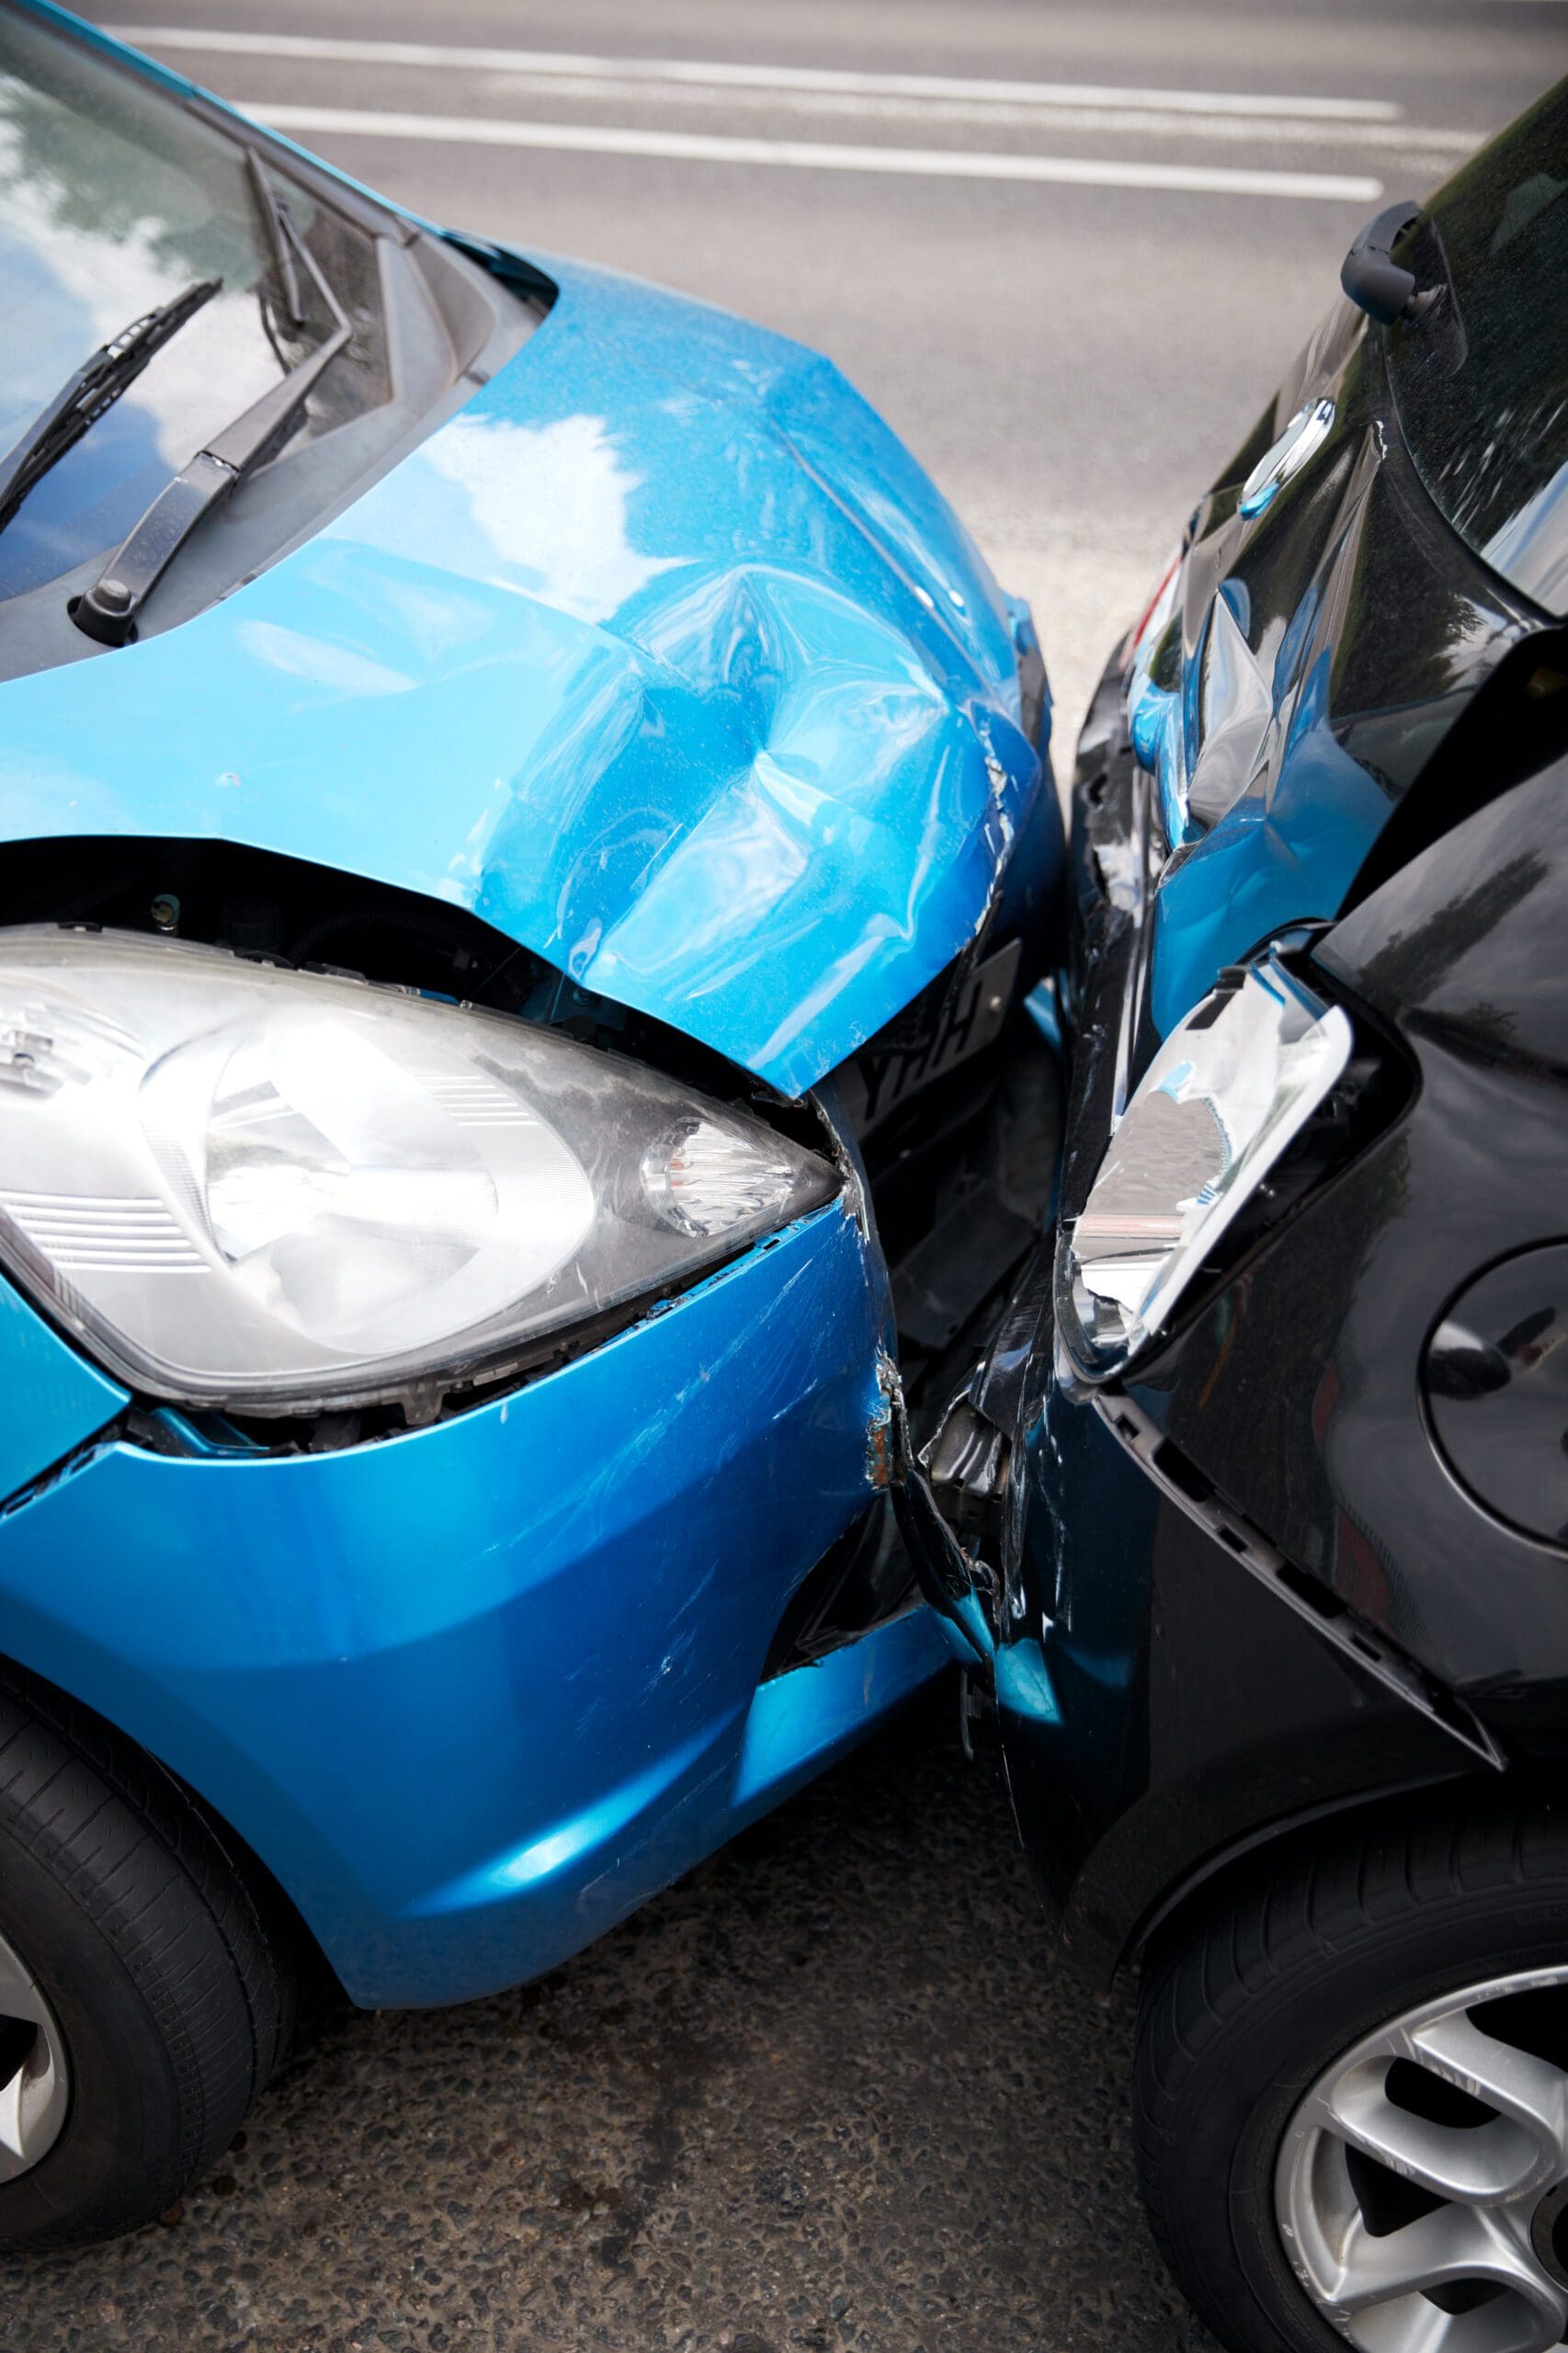 close-up-of-two-cars-damaged-in-road-traffic-accid-2021-08-26-16-14-36-utc-scaled.jpg